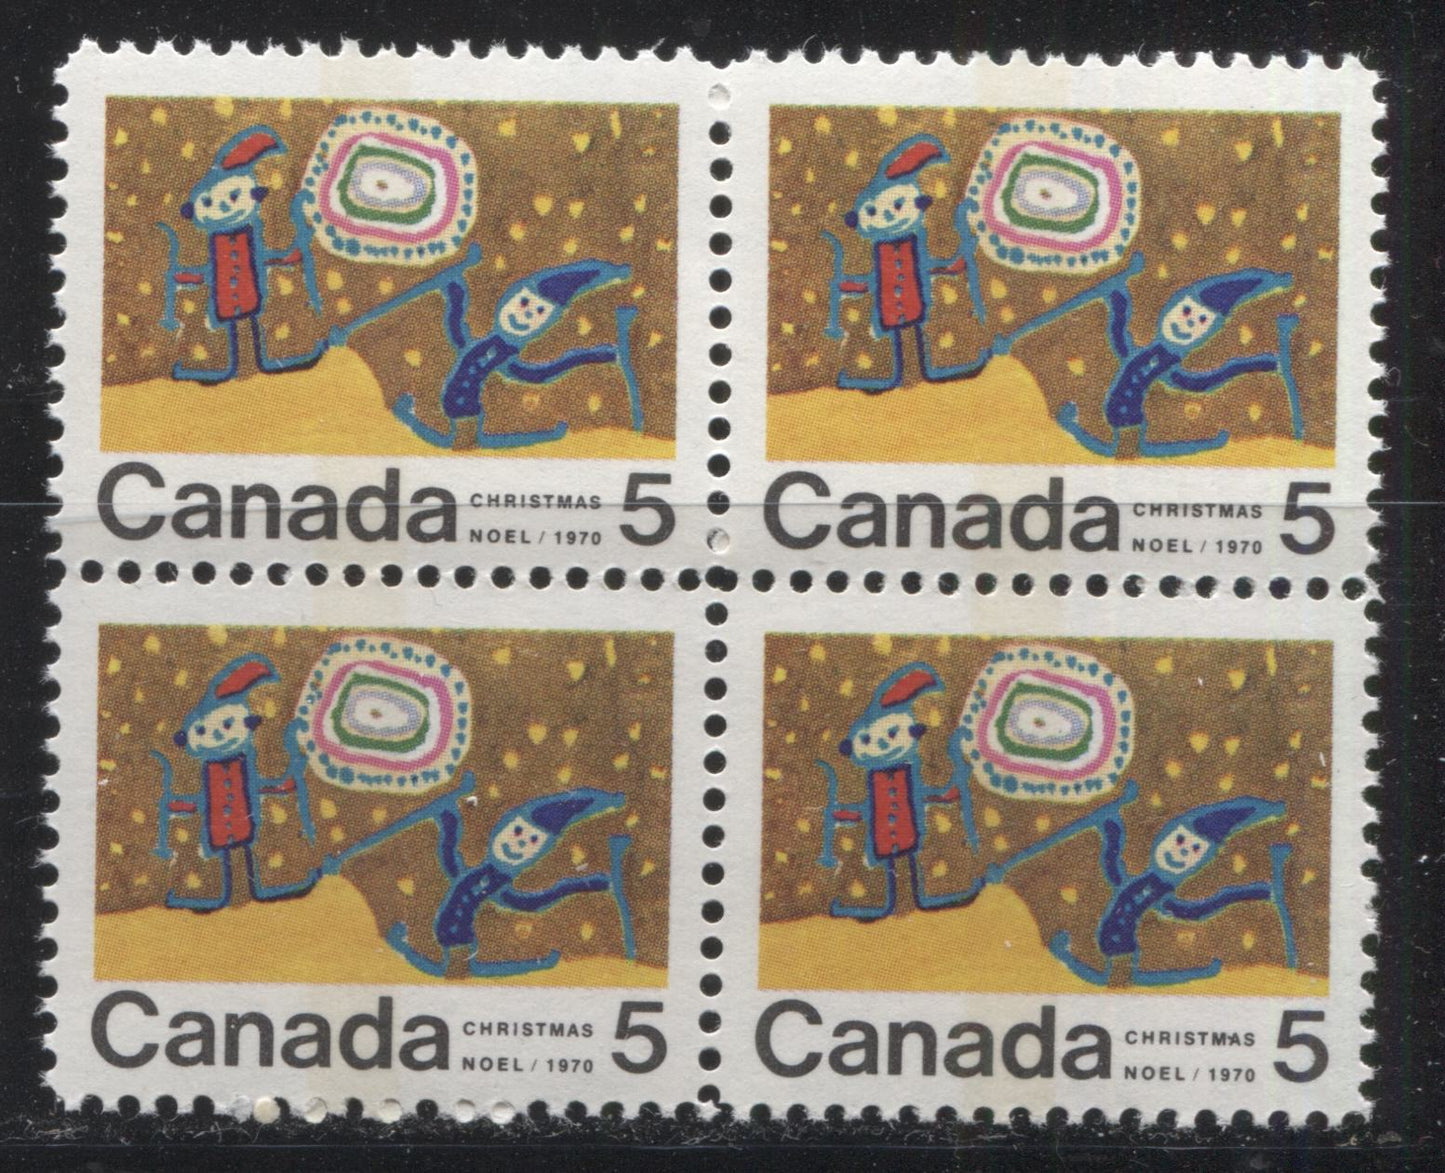 Lot 128 Canada #522pii 5c Multicoloured Children Skiing, 1970 Christmas Issue, a VFNH Winnipeg Tagged Centre Block of 4 on HB11 Ribbed Paper, With Dot Between "MA" of "Christmas" on LR Stamp, Perf. 11.9